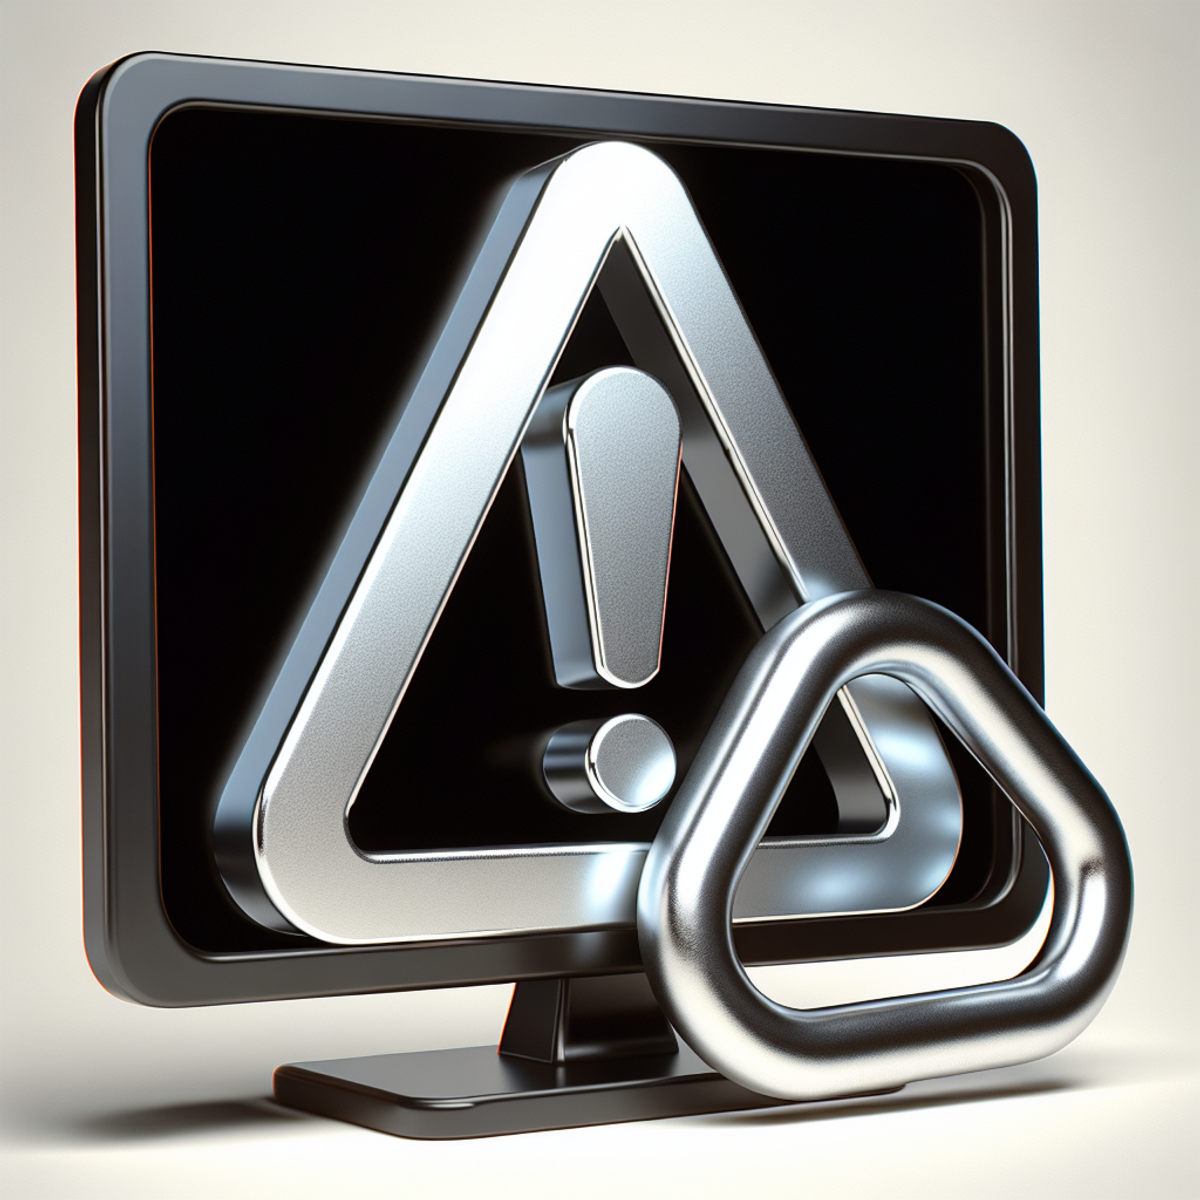 Computer monitor displaying an exclamation mark in a triangle and a broken chain link icon.